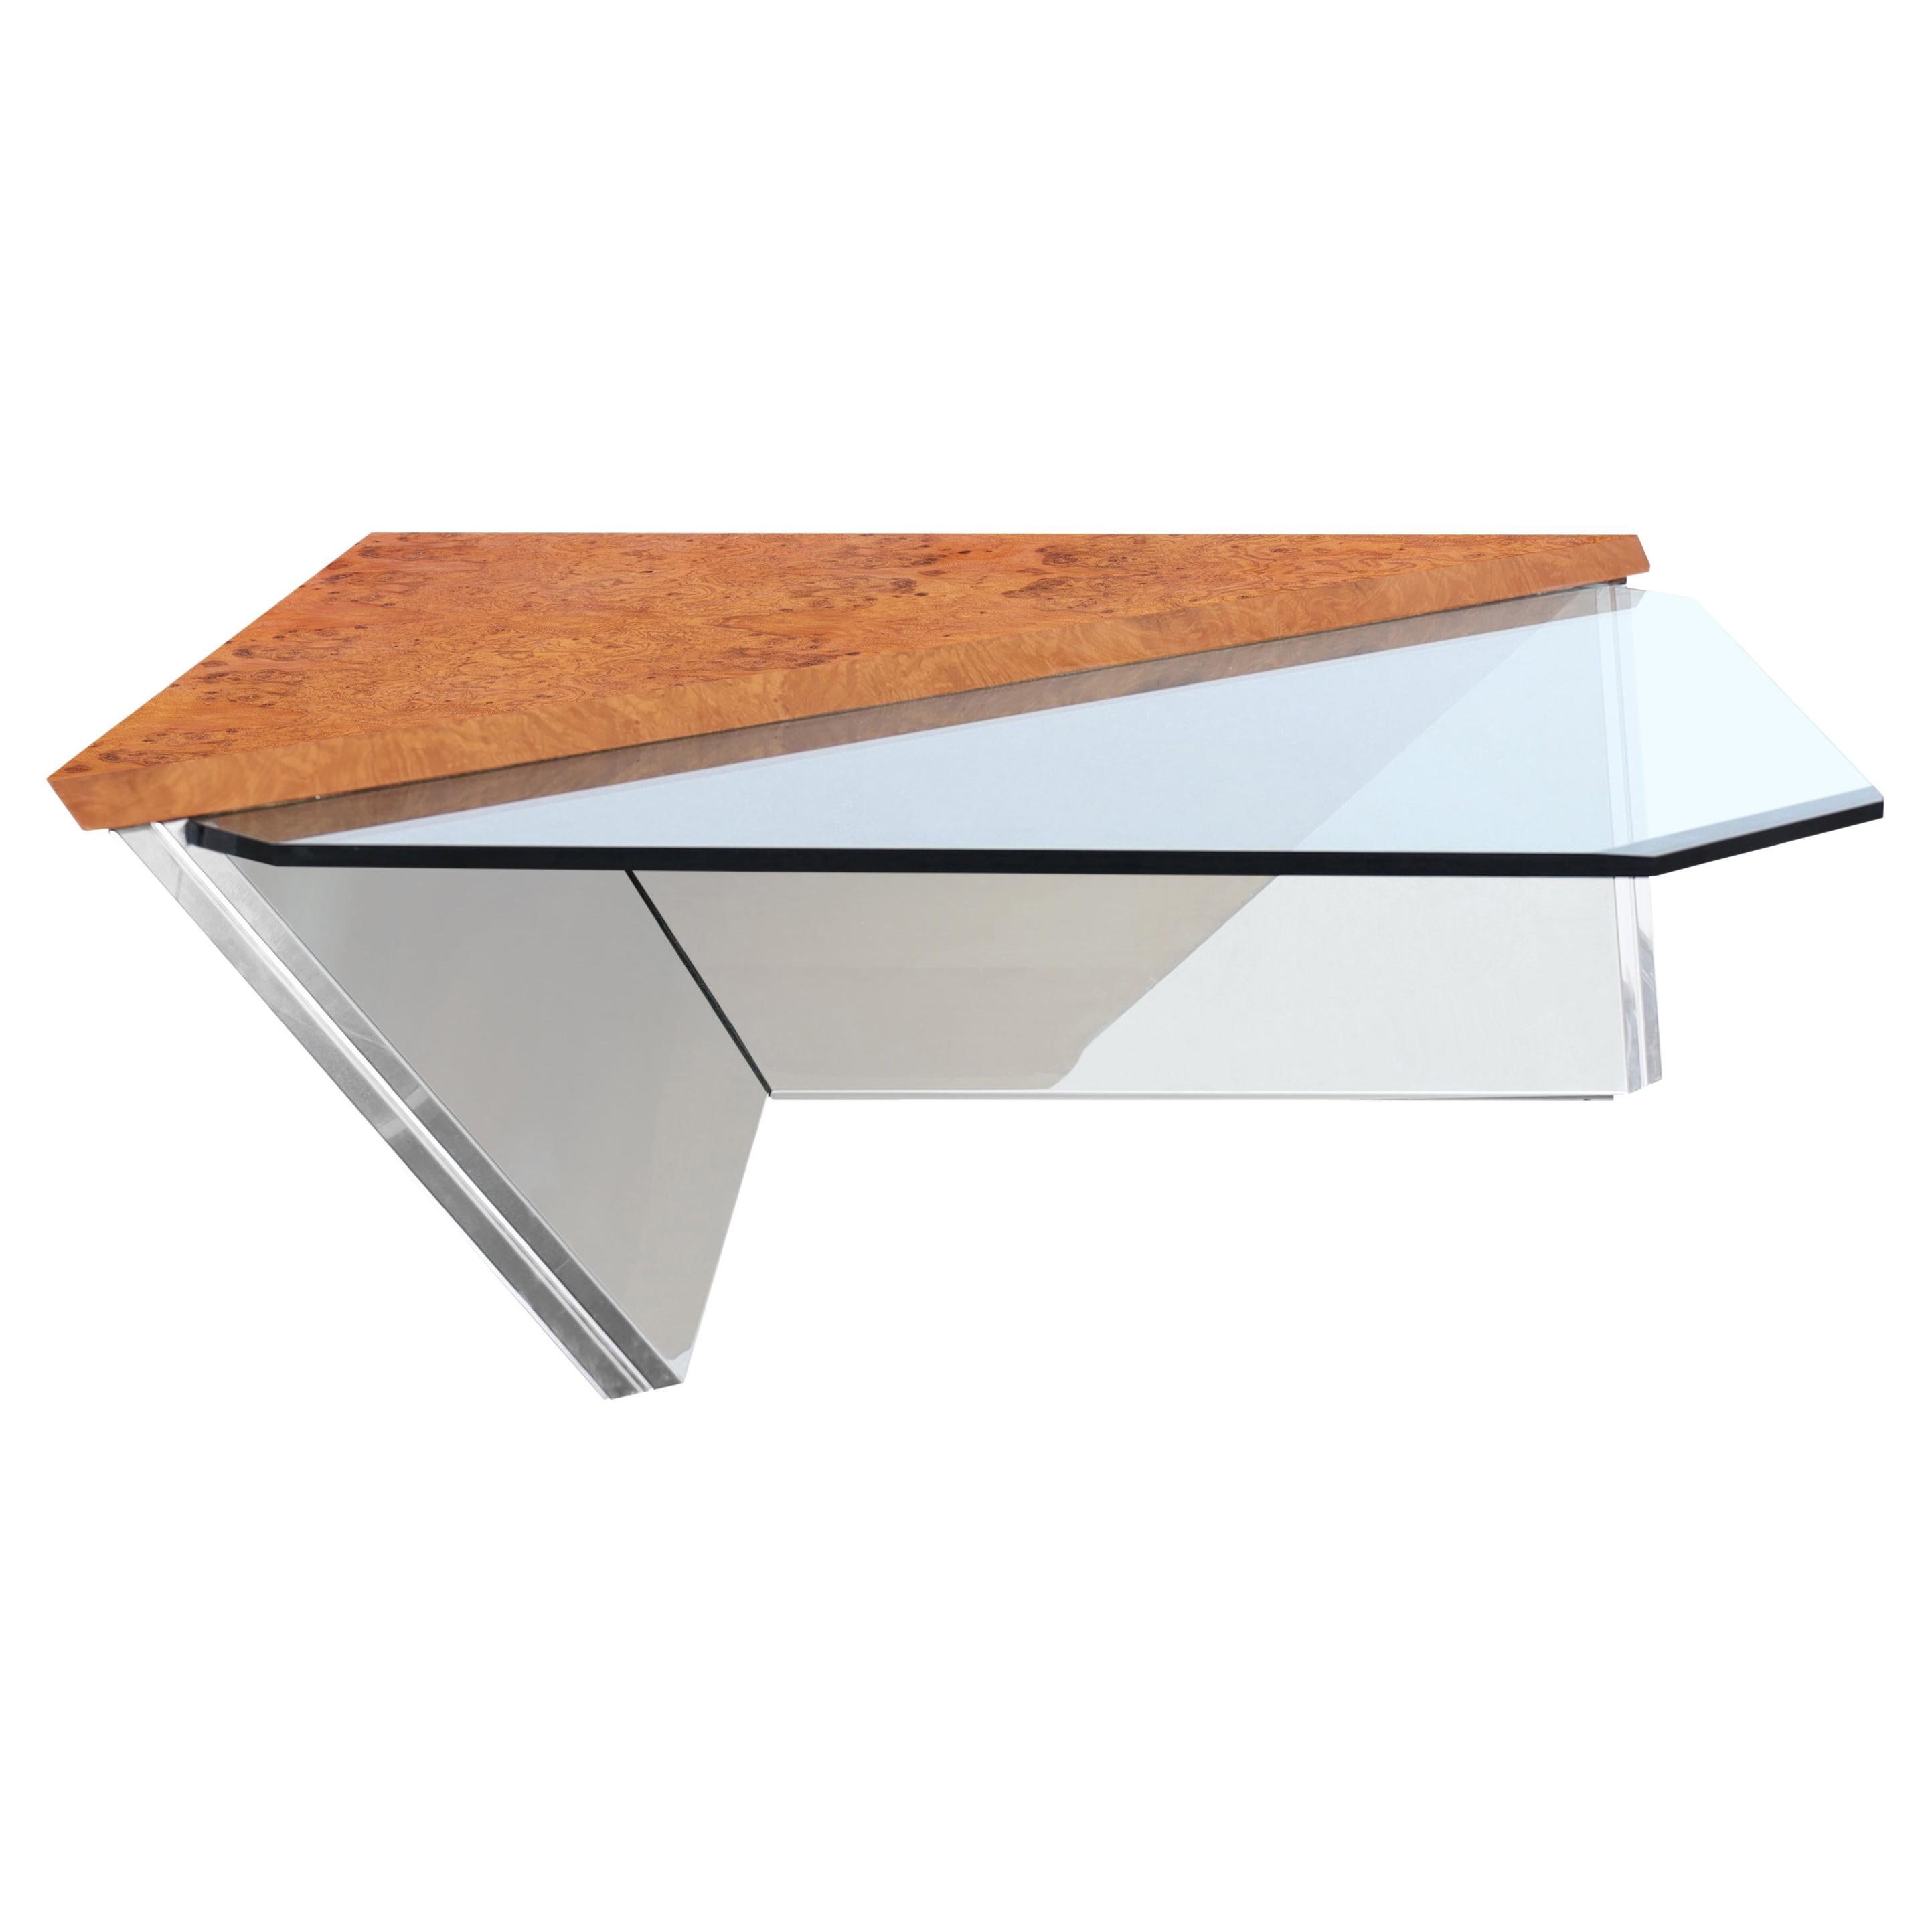 Vintage Stainless Steel Cantilevered Coffee Table Attributed to Brueton For Sale